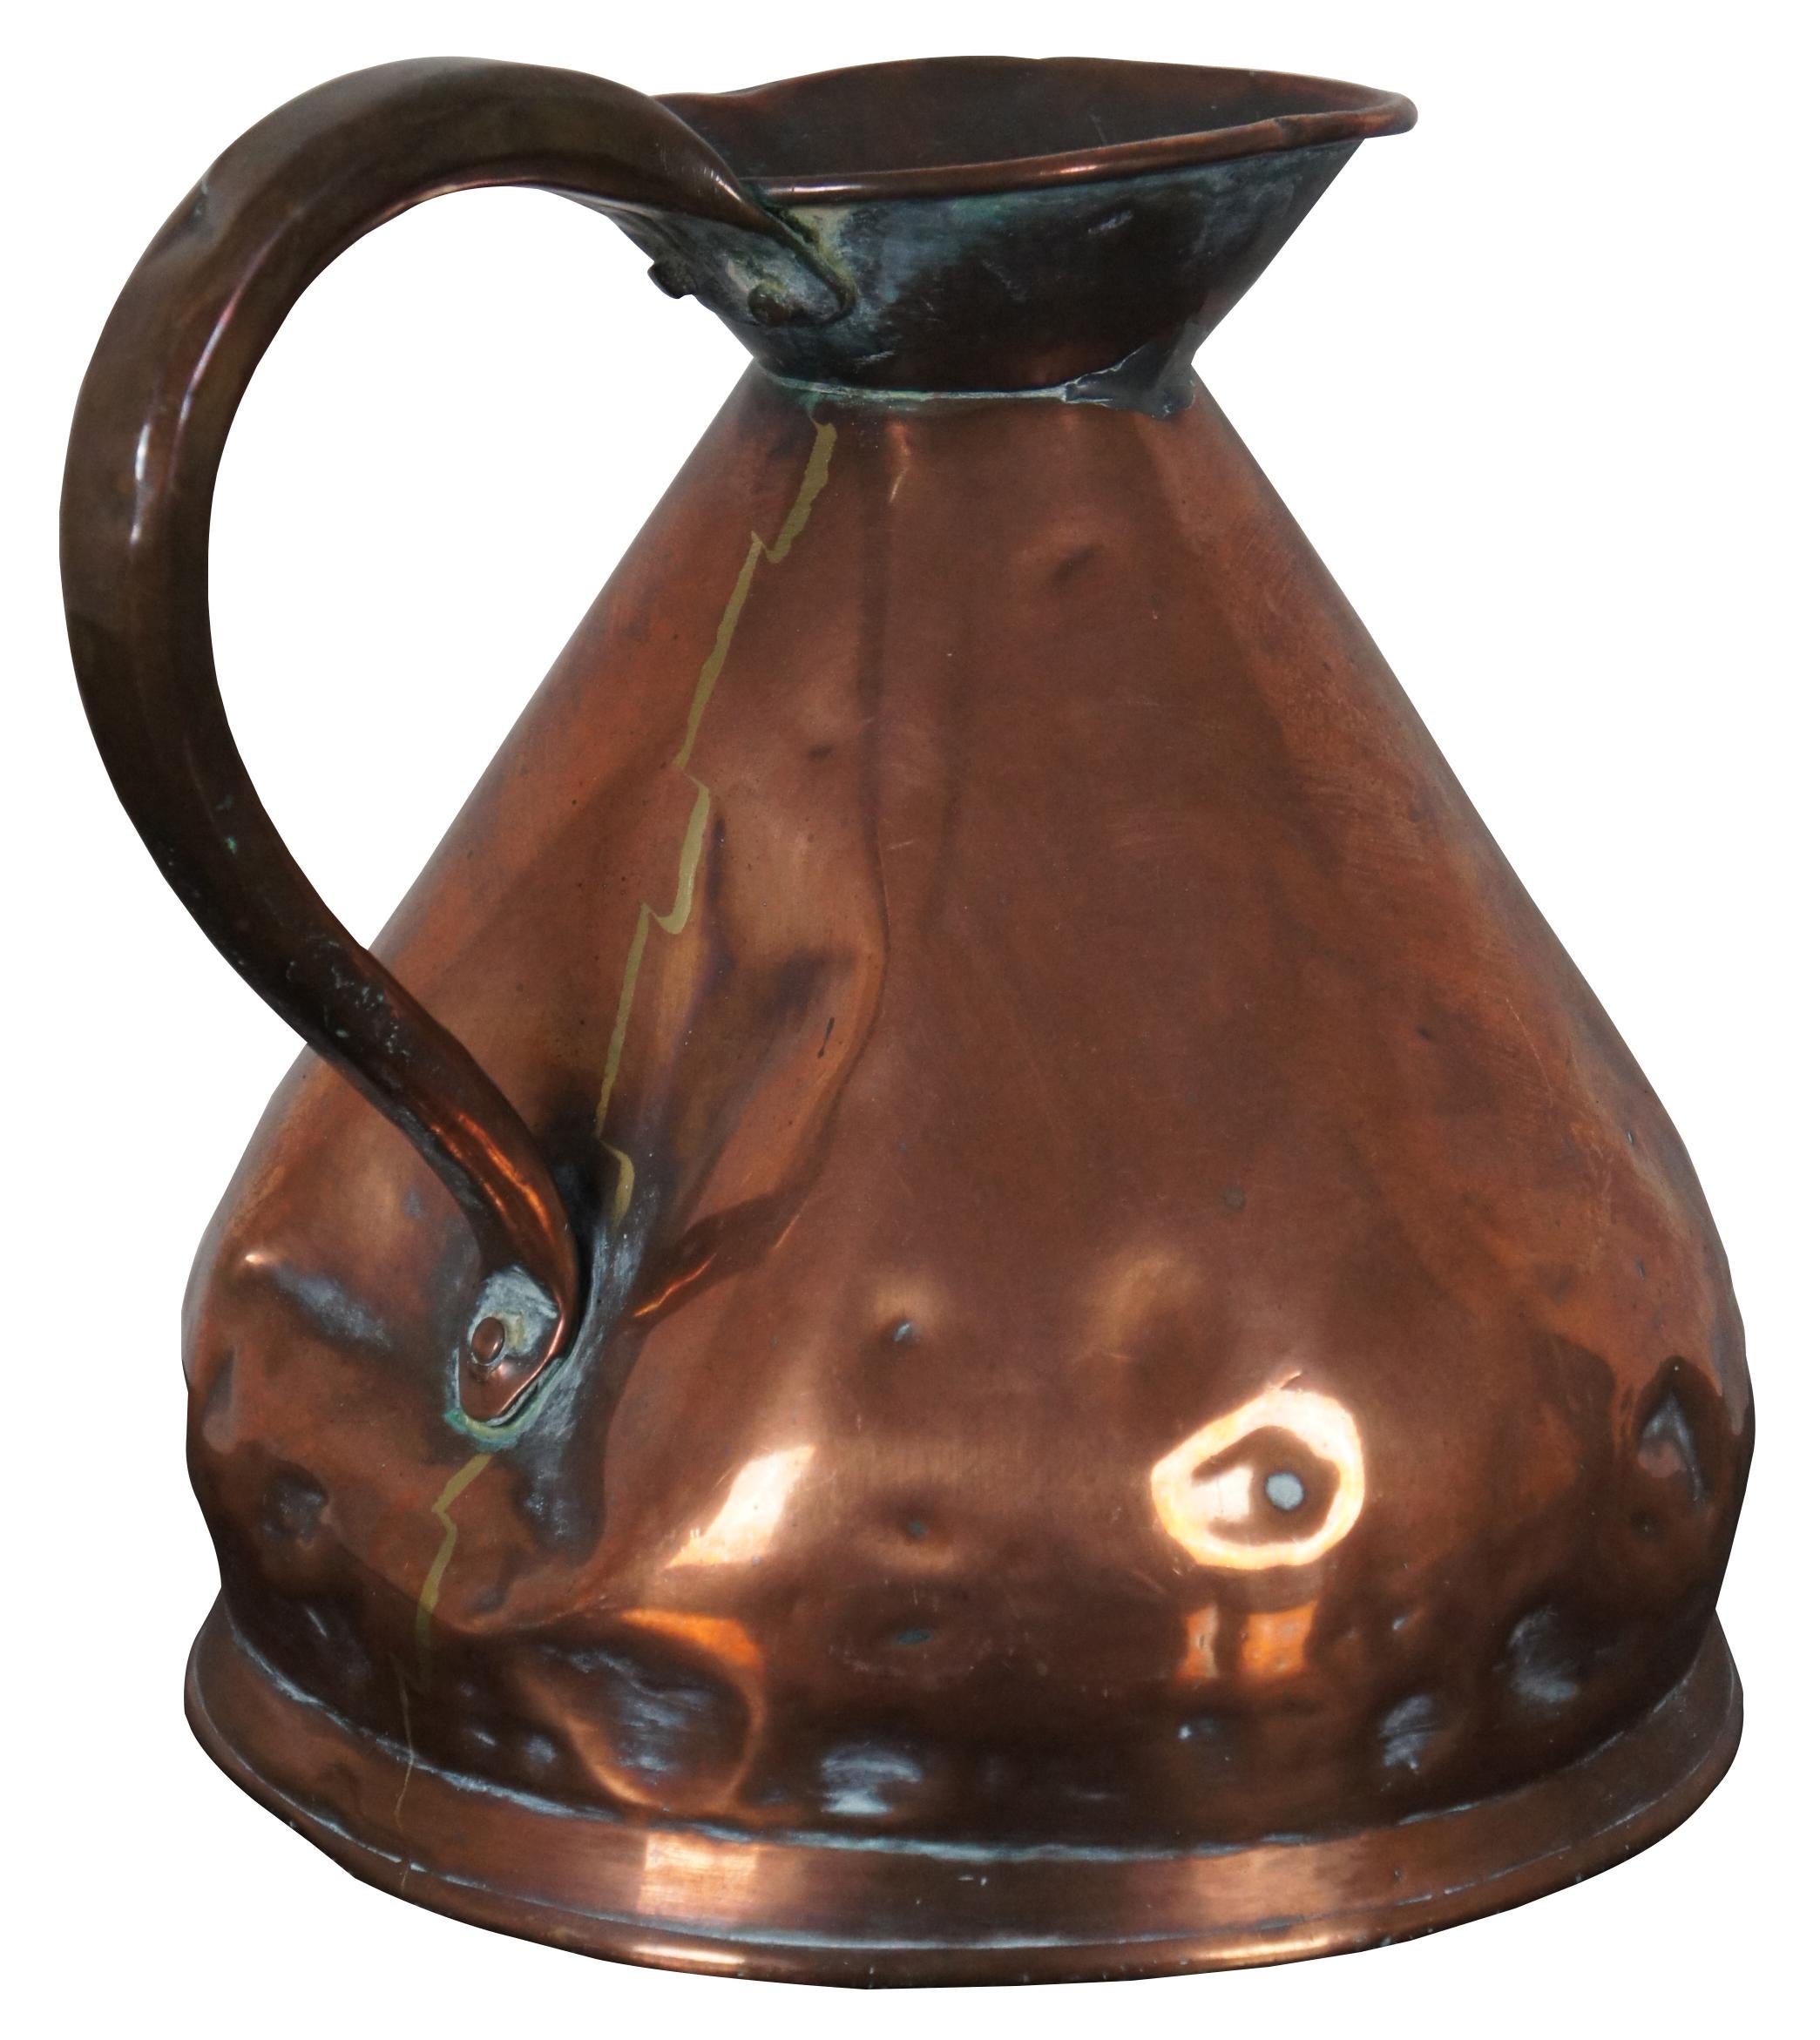 Antique English Victorian dovetailed copper one gallon sized haystack pitcher with handle, circa late 19th century. Includes verification mark. Measures: 11